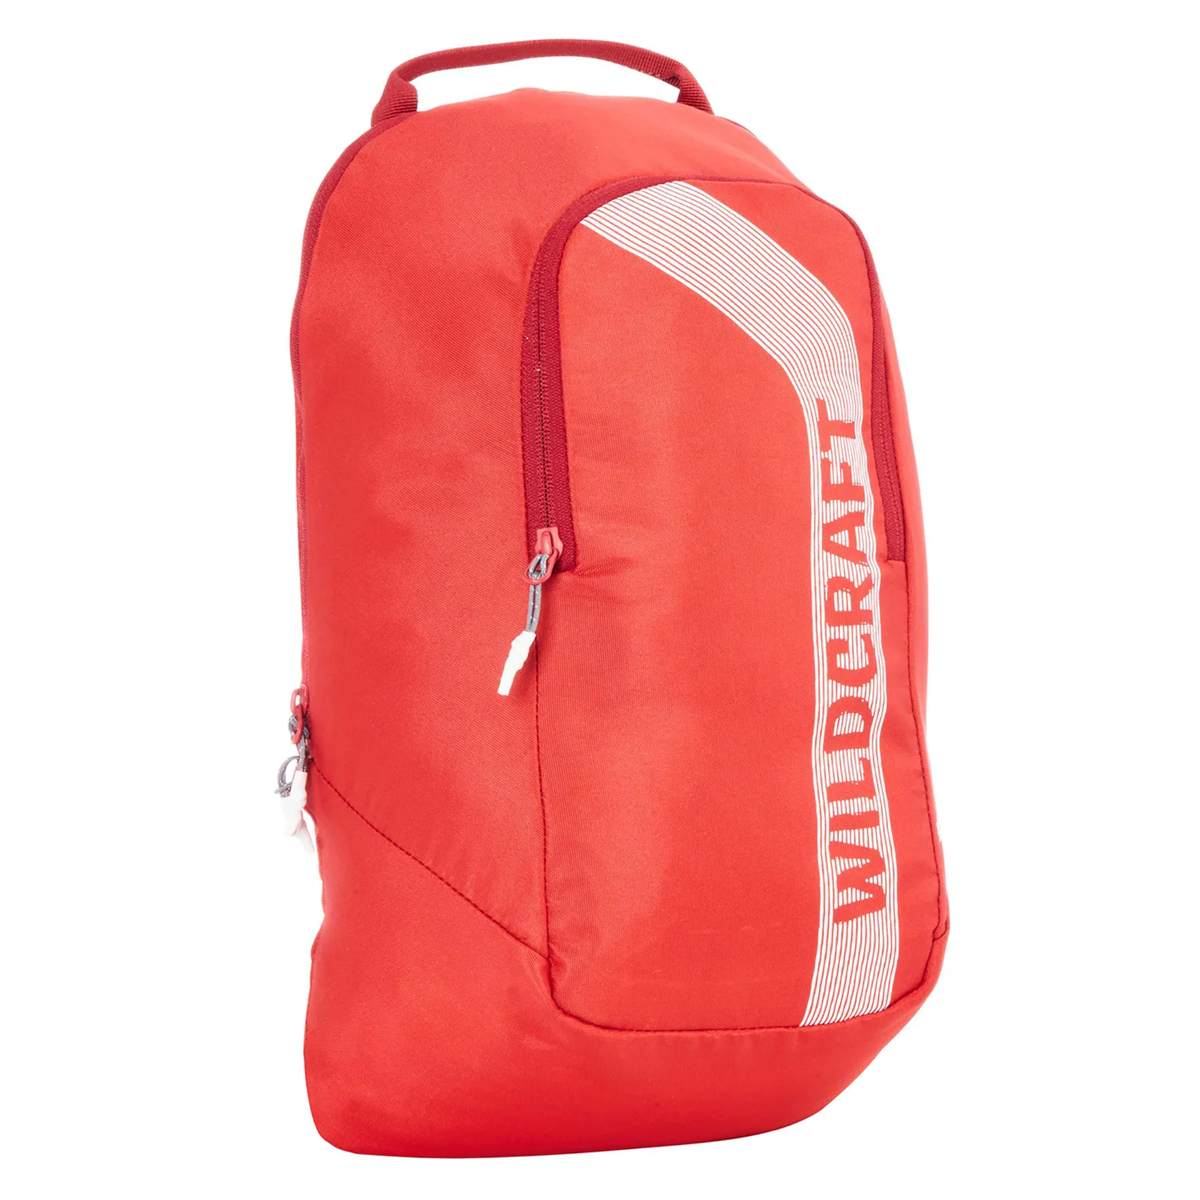 Wildcraft Pebble 3 New Backpack, Red